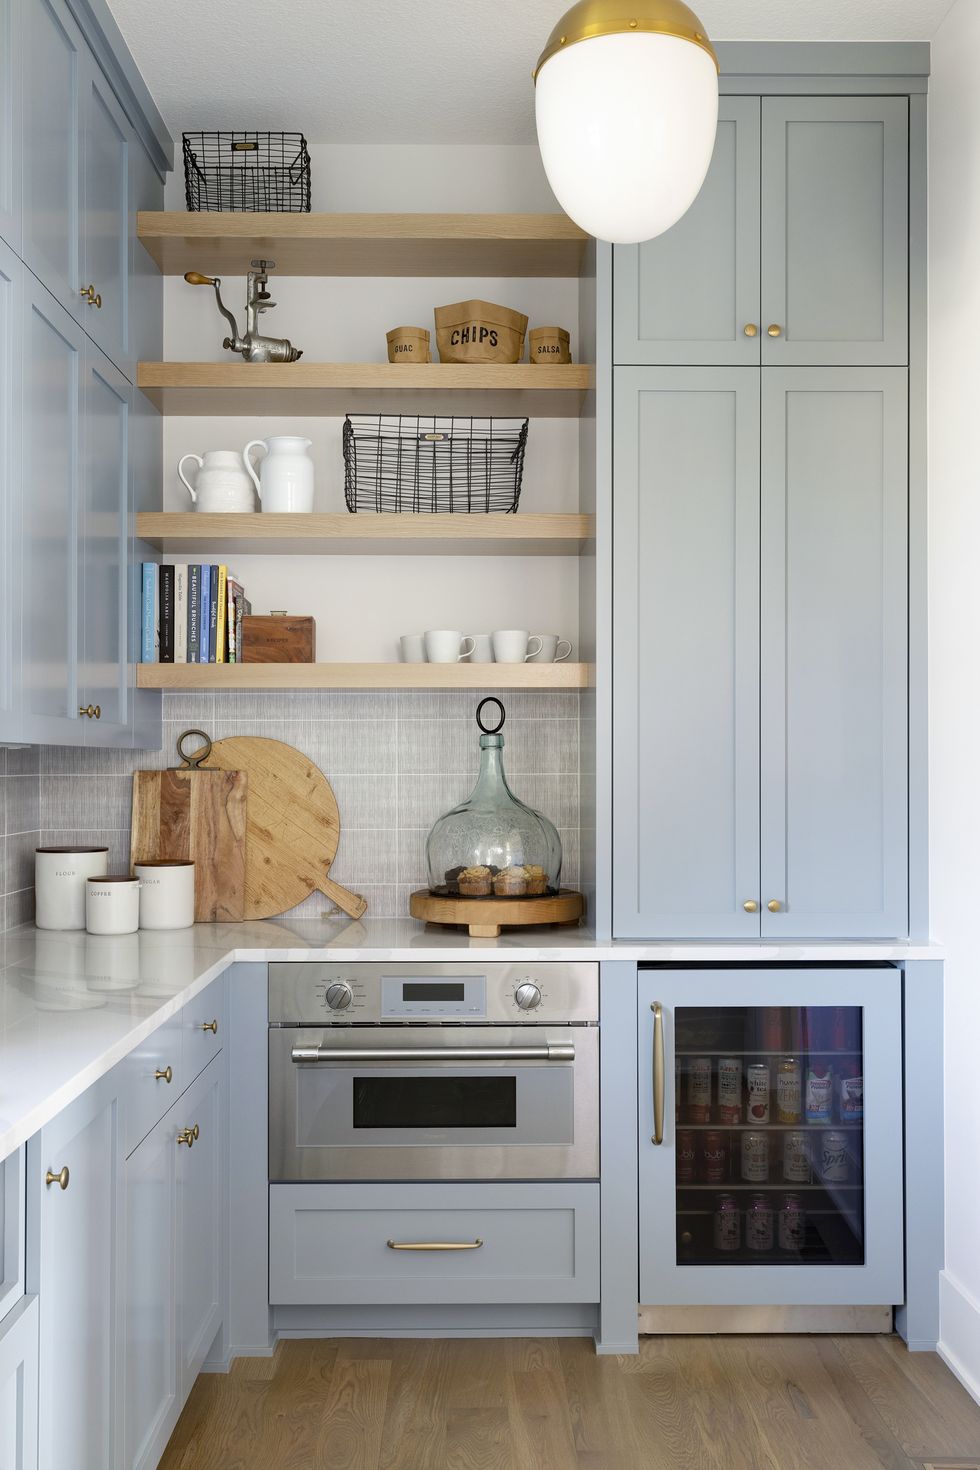 bria hammel interiors baby blue cabinets and open shelving